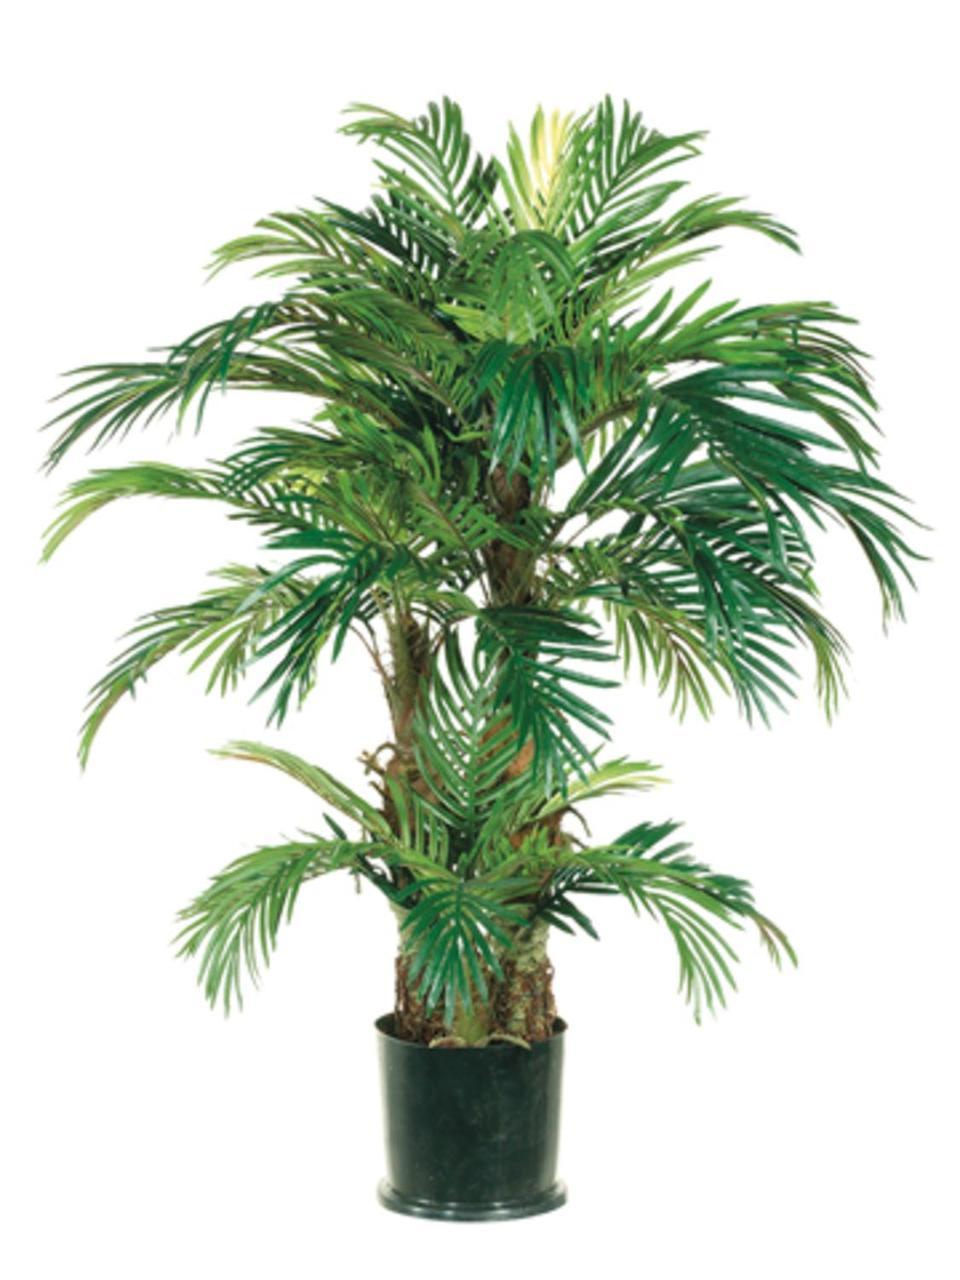 Potted Palm Tree on White Background